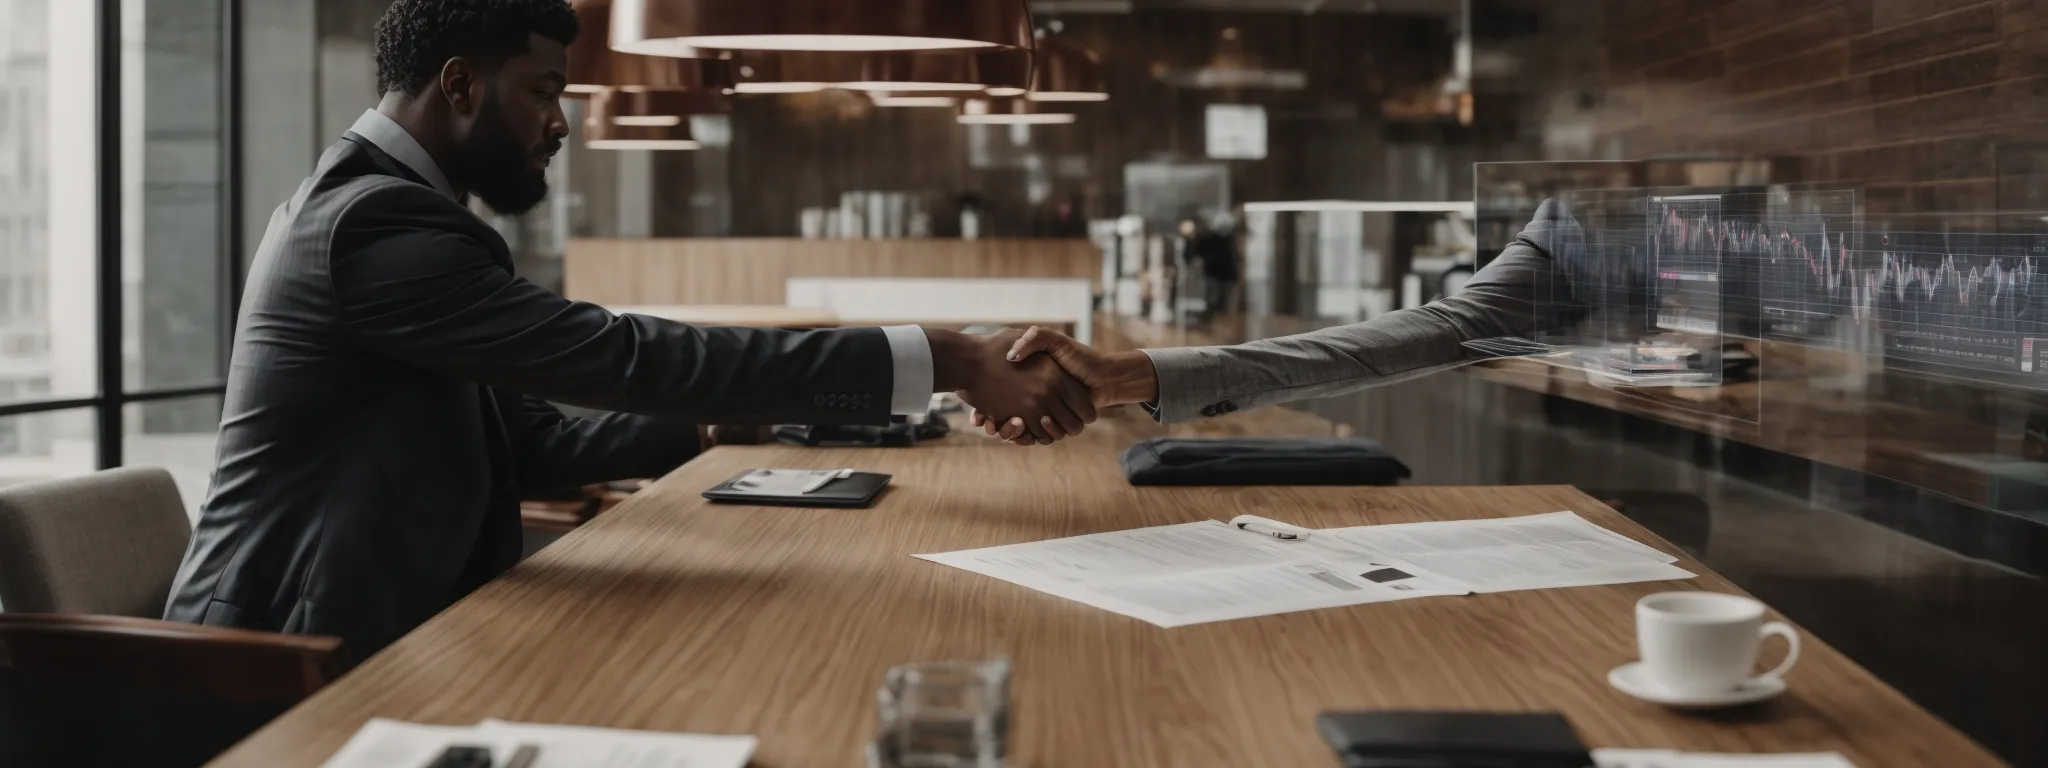 two professionals shaking hands across a table, with digital marketing strategy diagrams visible on their screens.